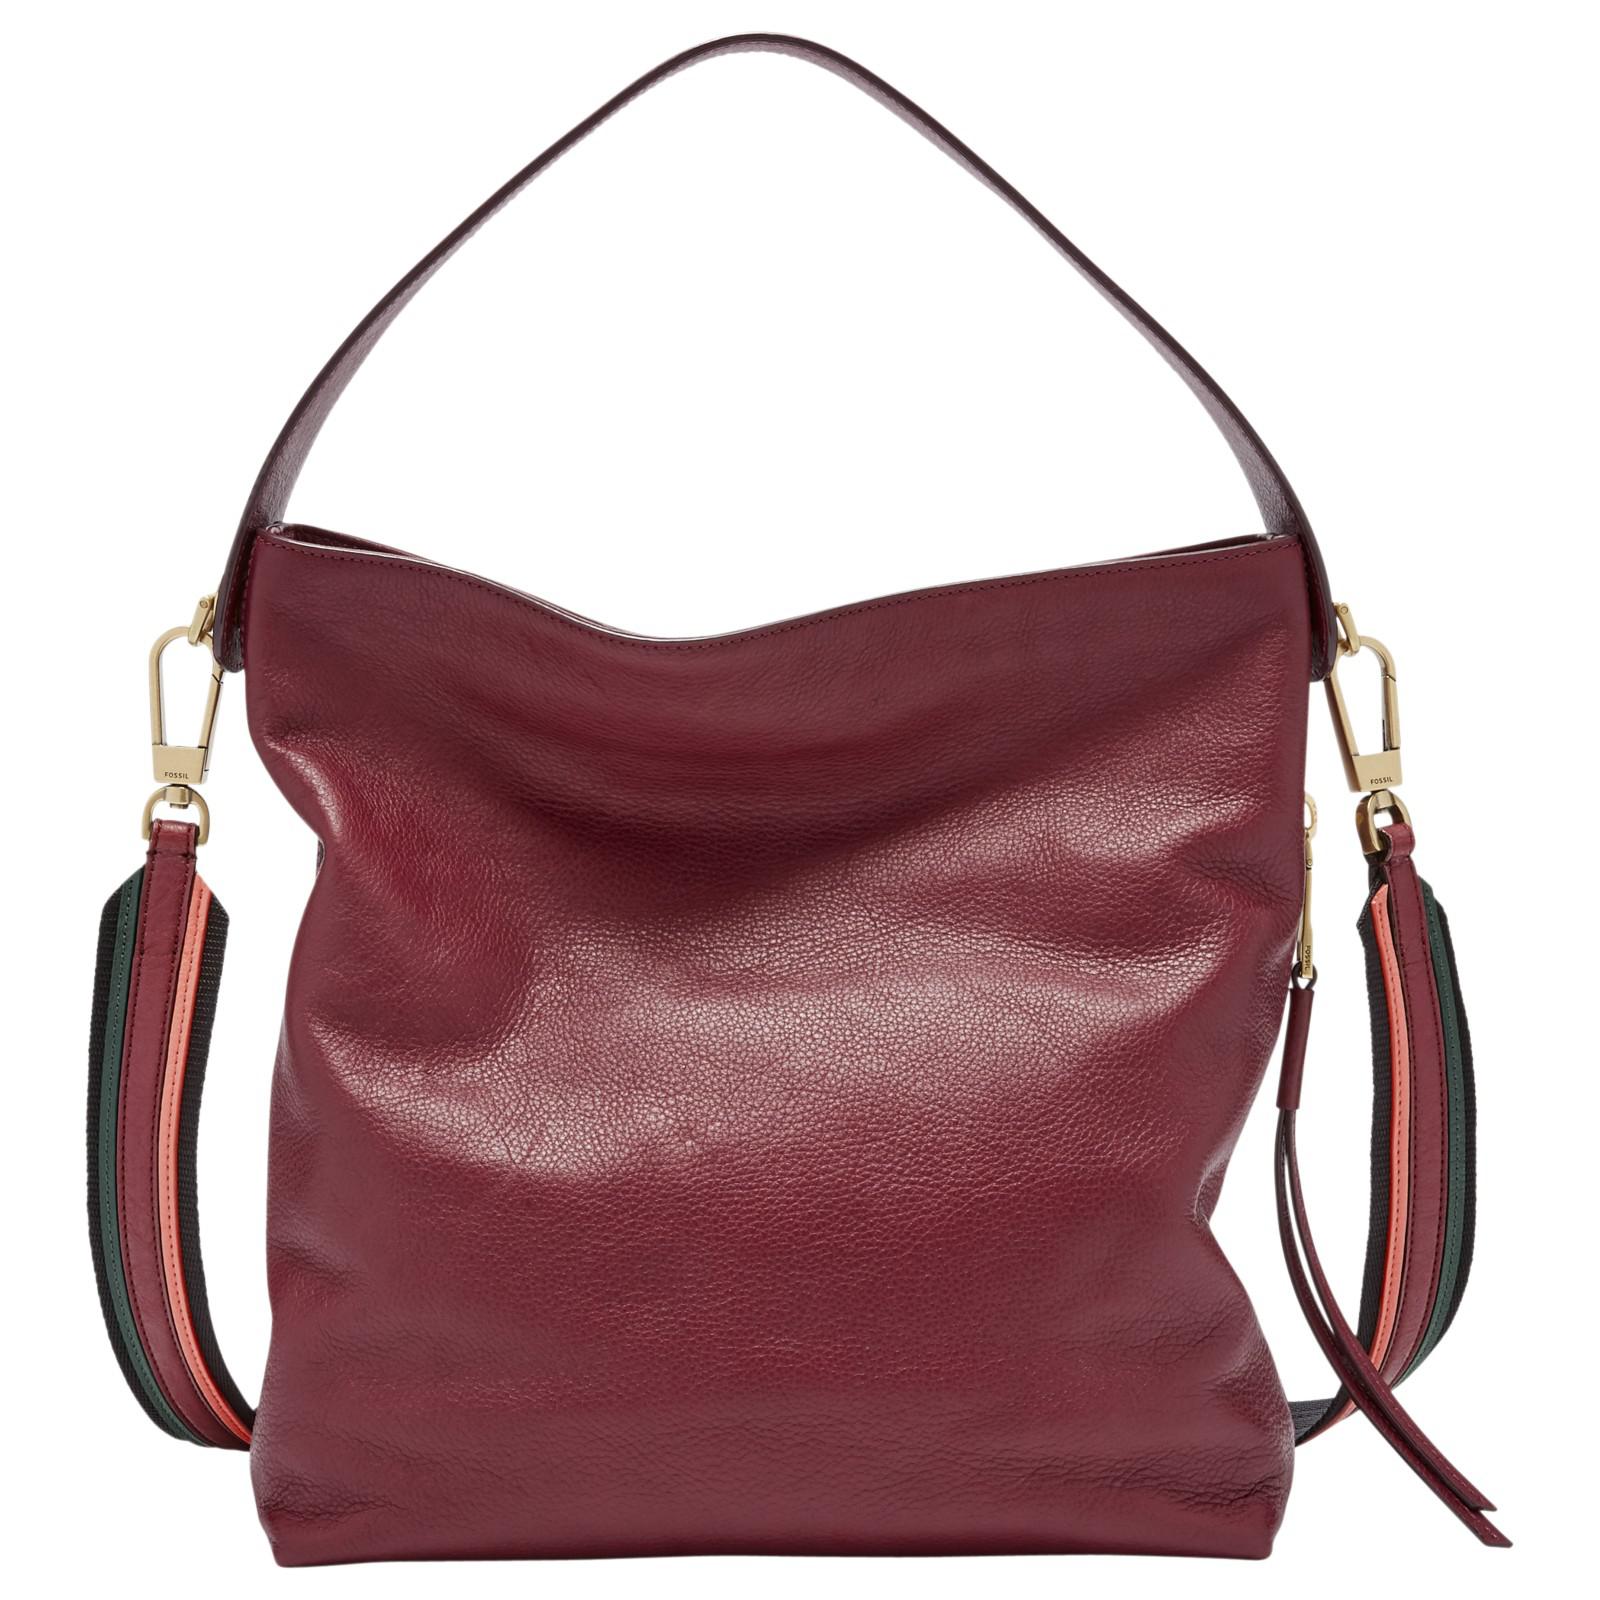 Fossil Maya Small Leather Hobo Bag in Purple - Lyst